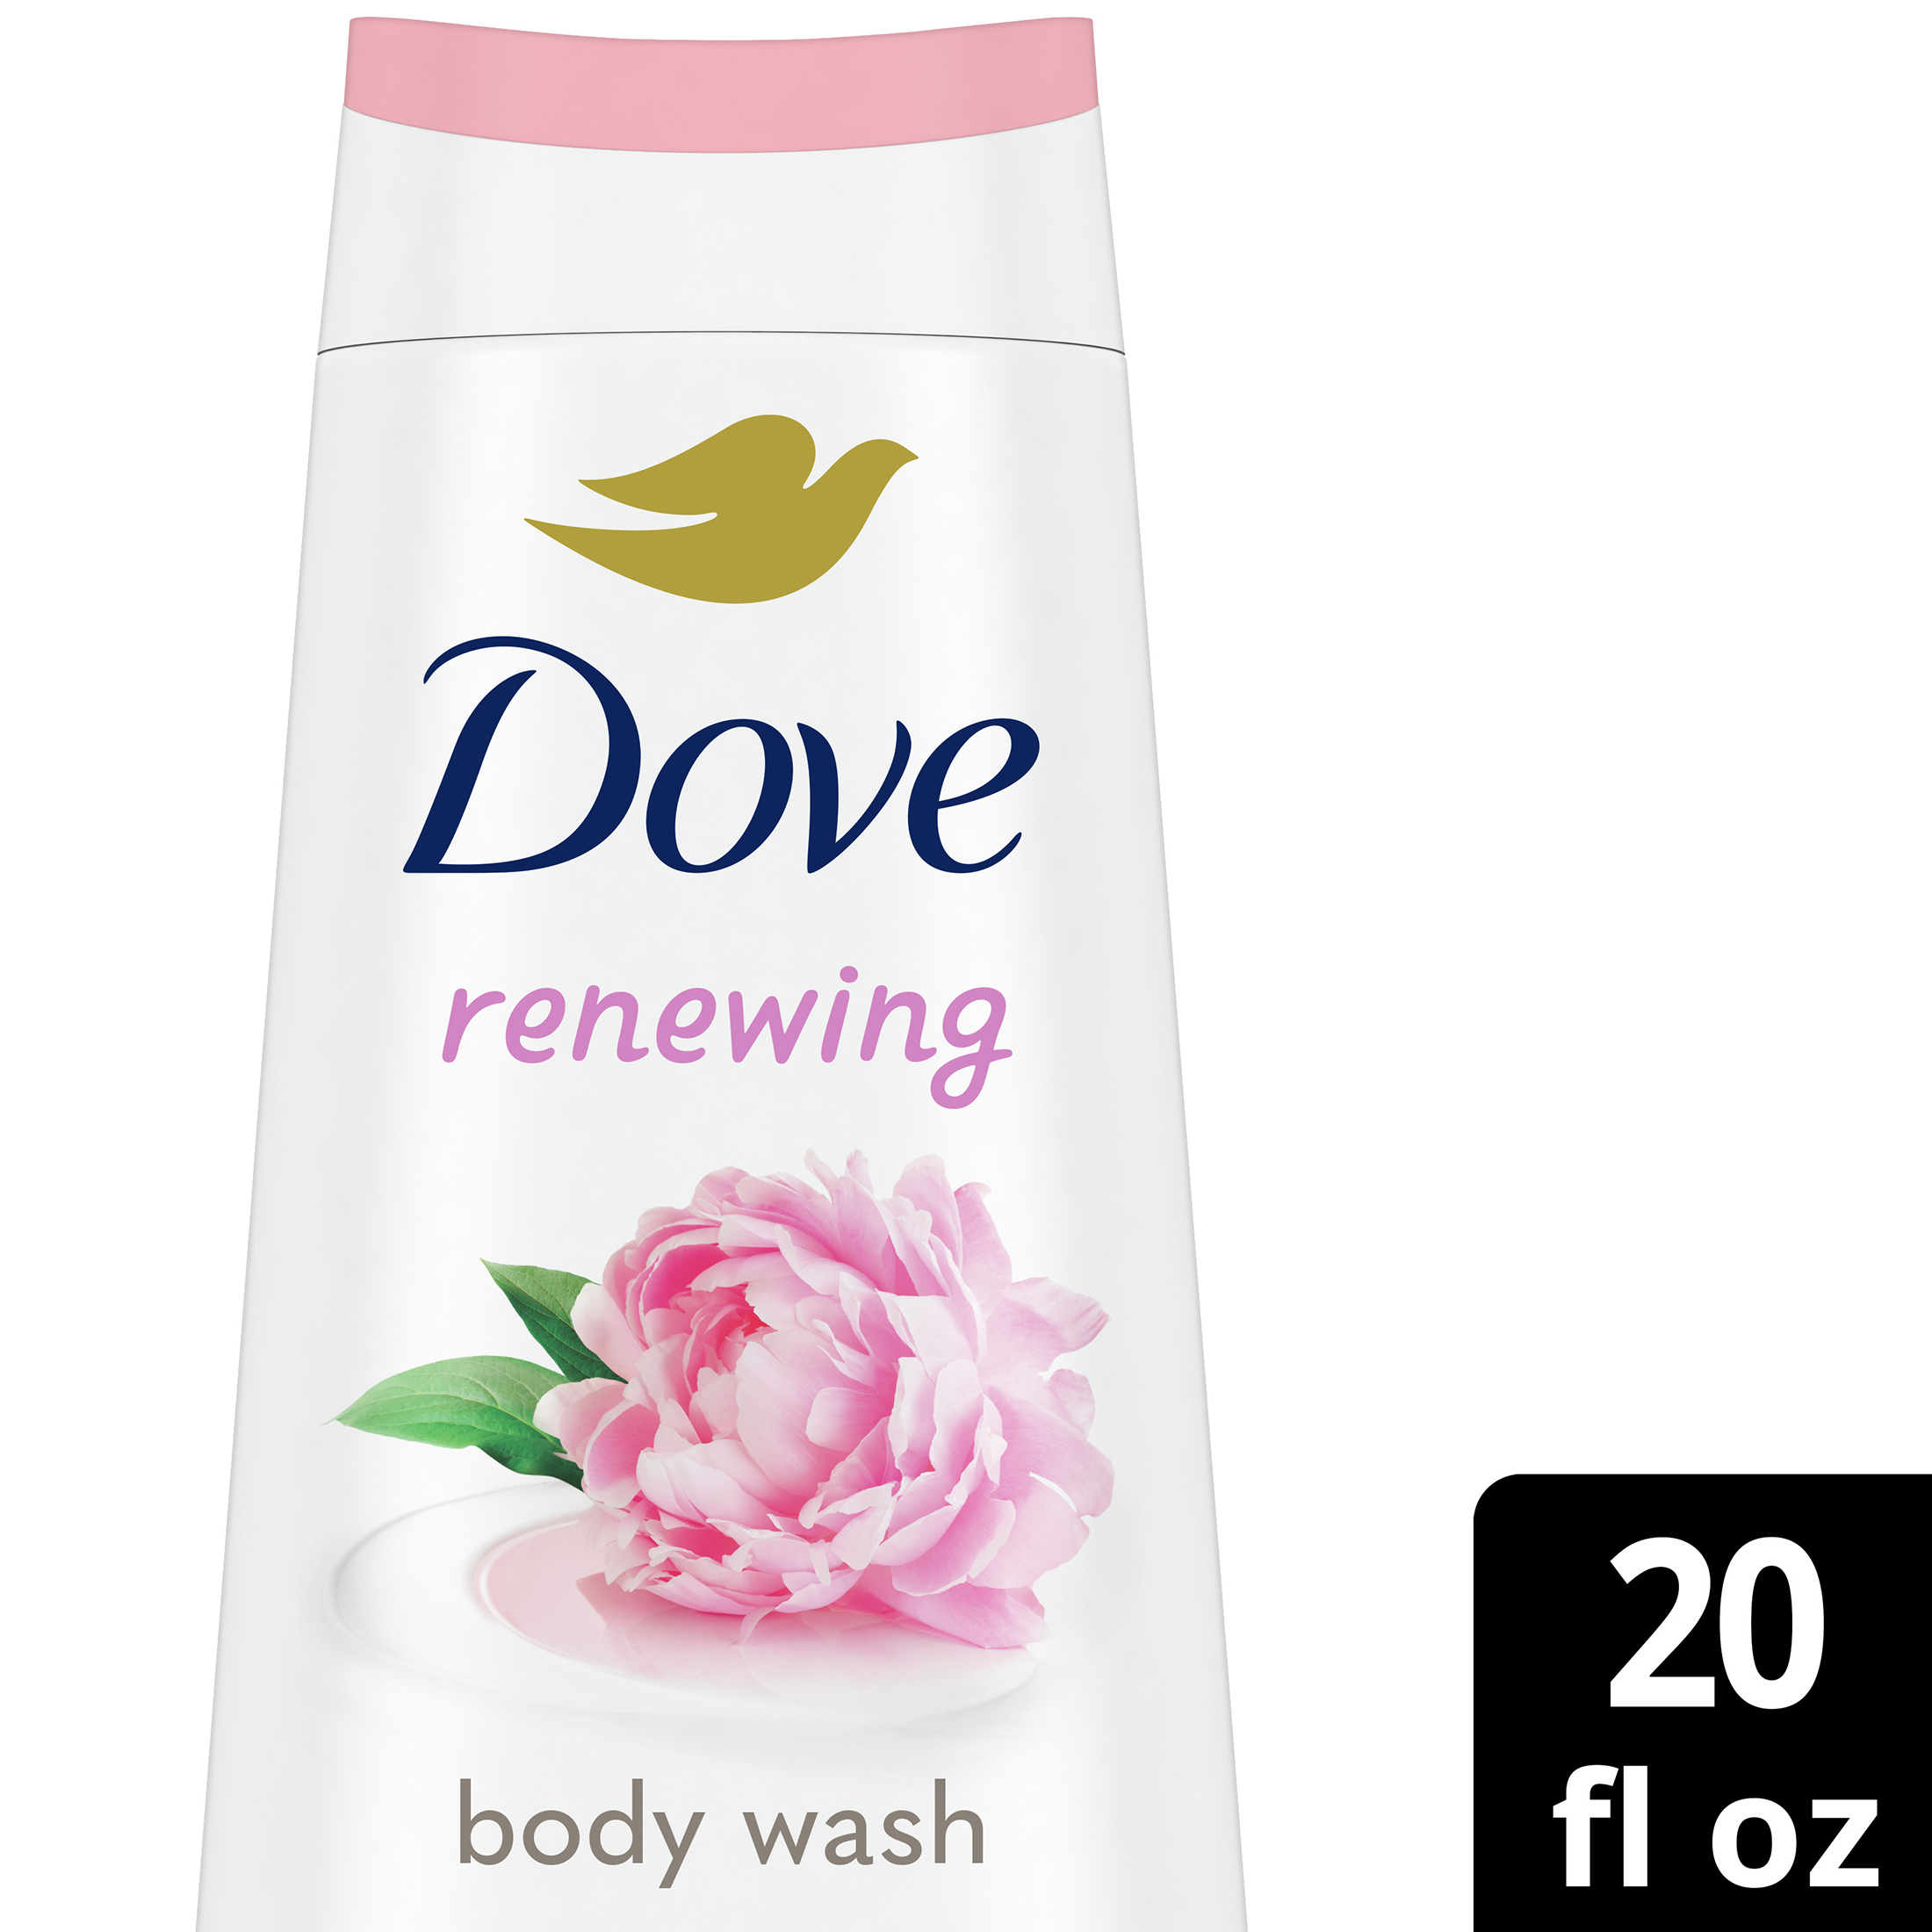 Dove Renewing Gentle Women's Body Wash for All Skin Type, Peony and Rose Oil, 20 fl oz - image 3 of 11